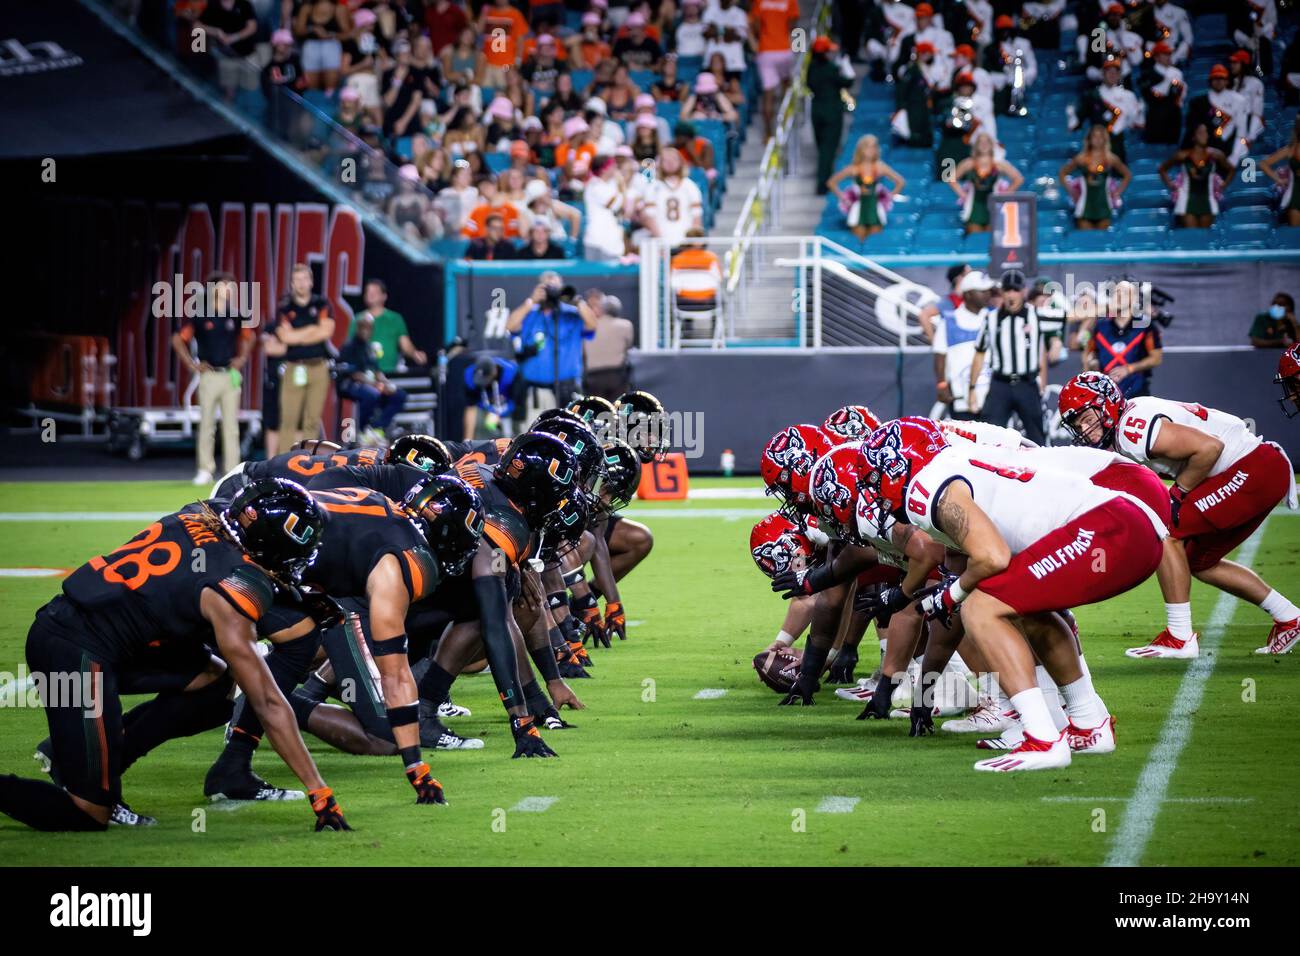 Oct. 23, 2021 - Miami Gardens, Florida, USA: Miami Hurricanes v NC State Wolfpack, 2021 College Football Game in Hard Rock Stadium. Stock Photo